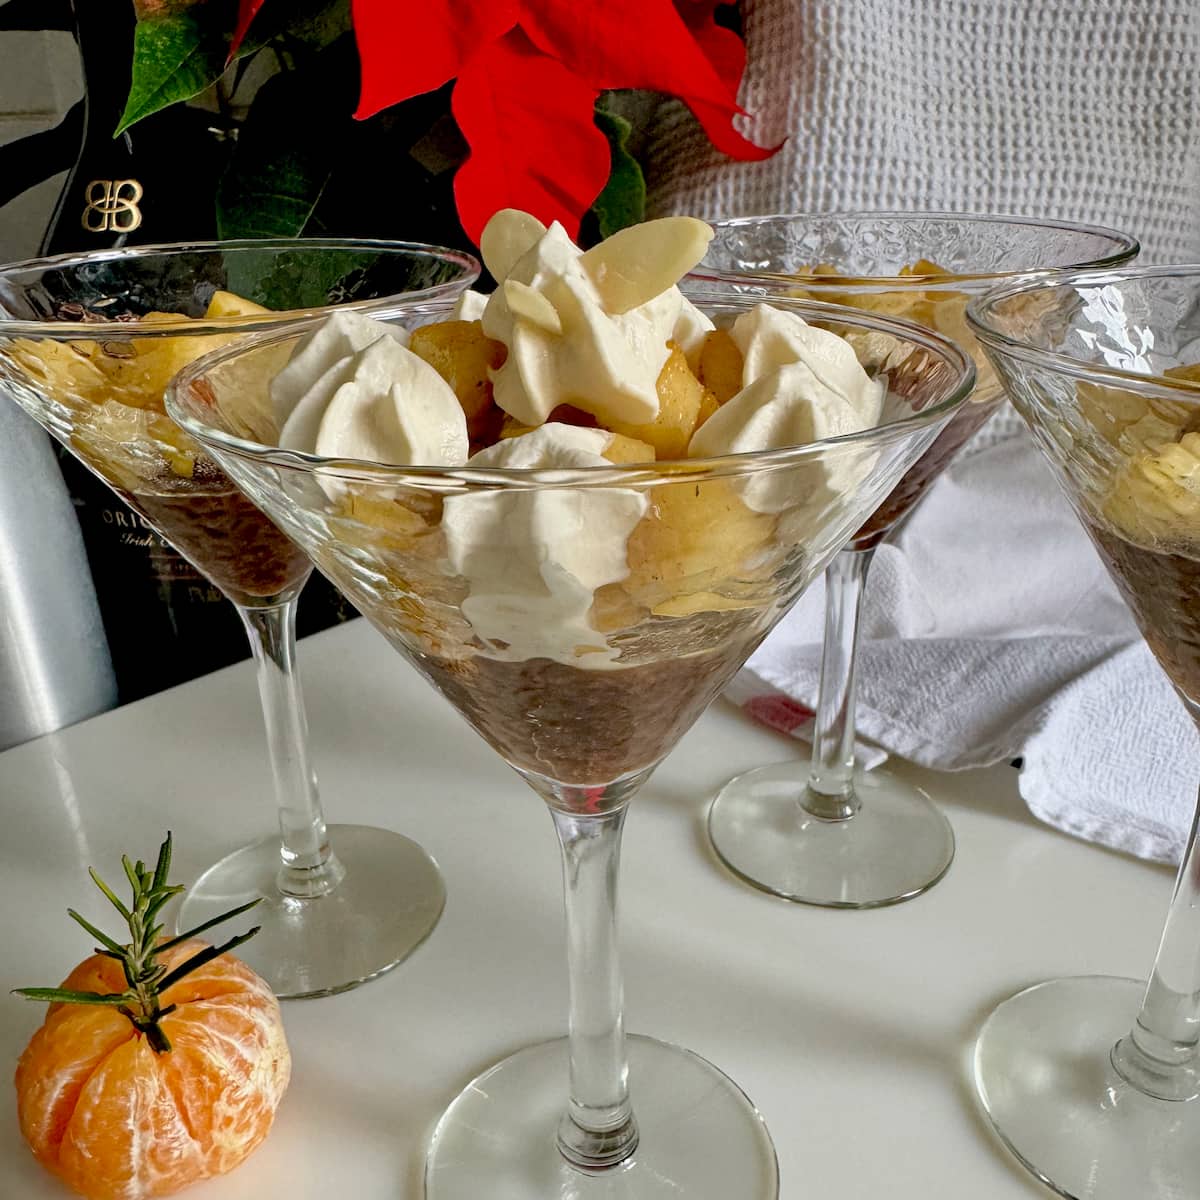 glass with a layered gingerbread trifle with caramelised apples, jelly, caramel and topped with boozy whipped cream